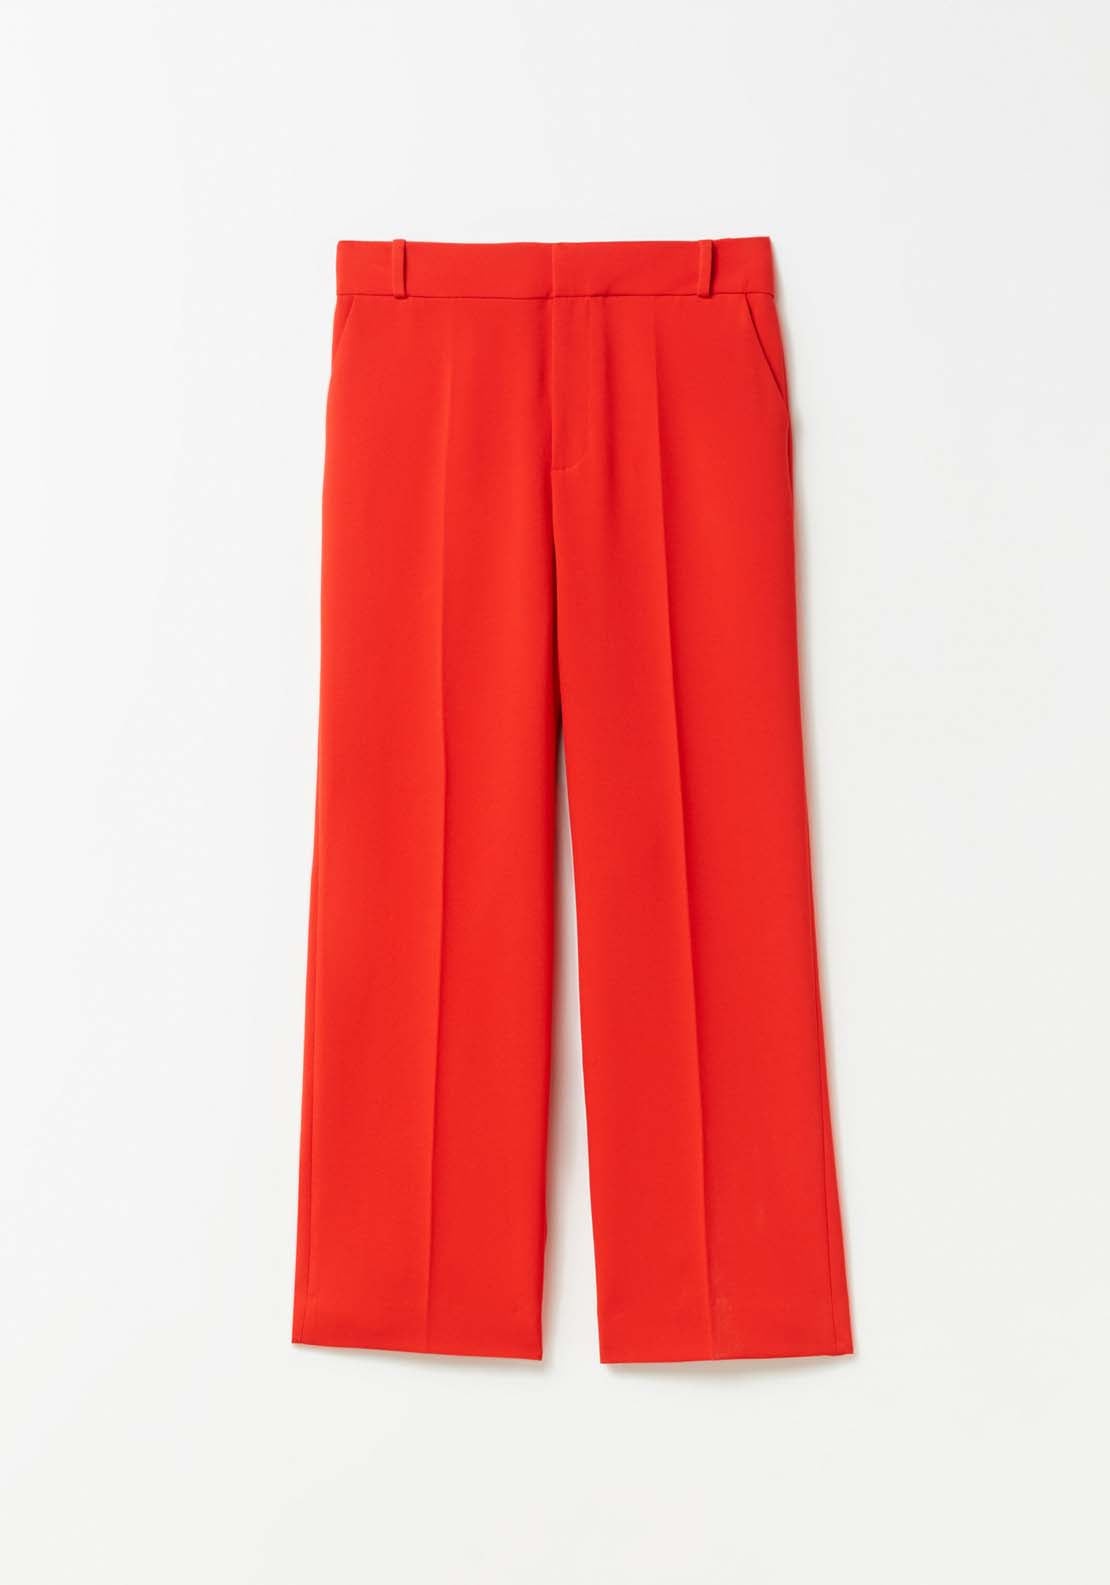 Sfera Suit trousers 6 Shaws Department Stores